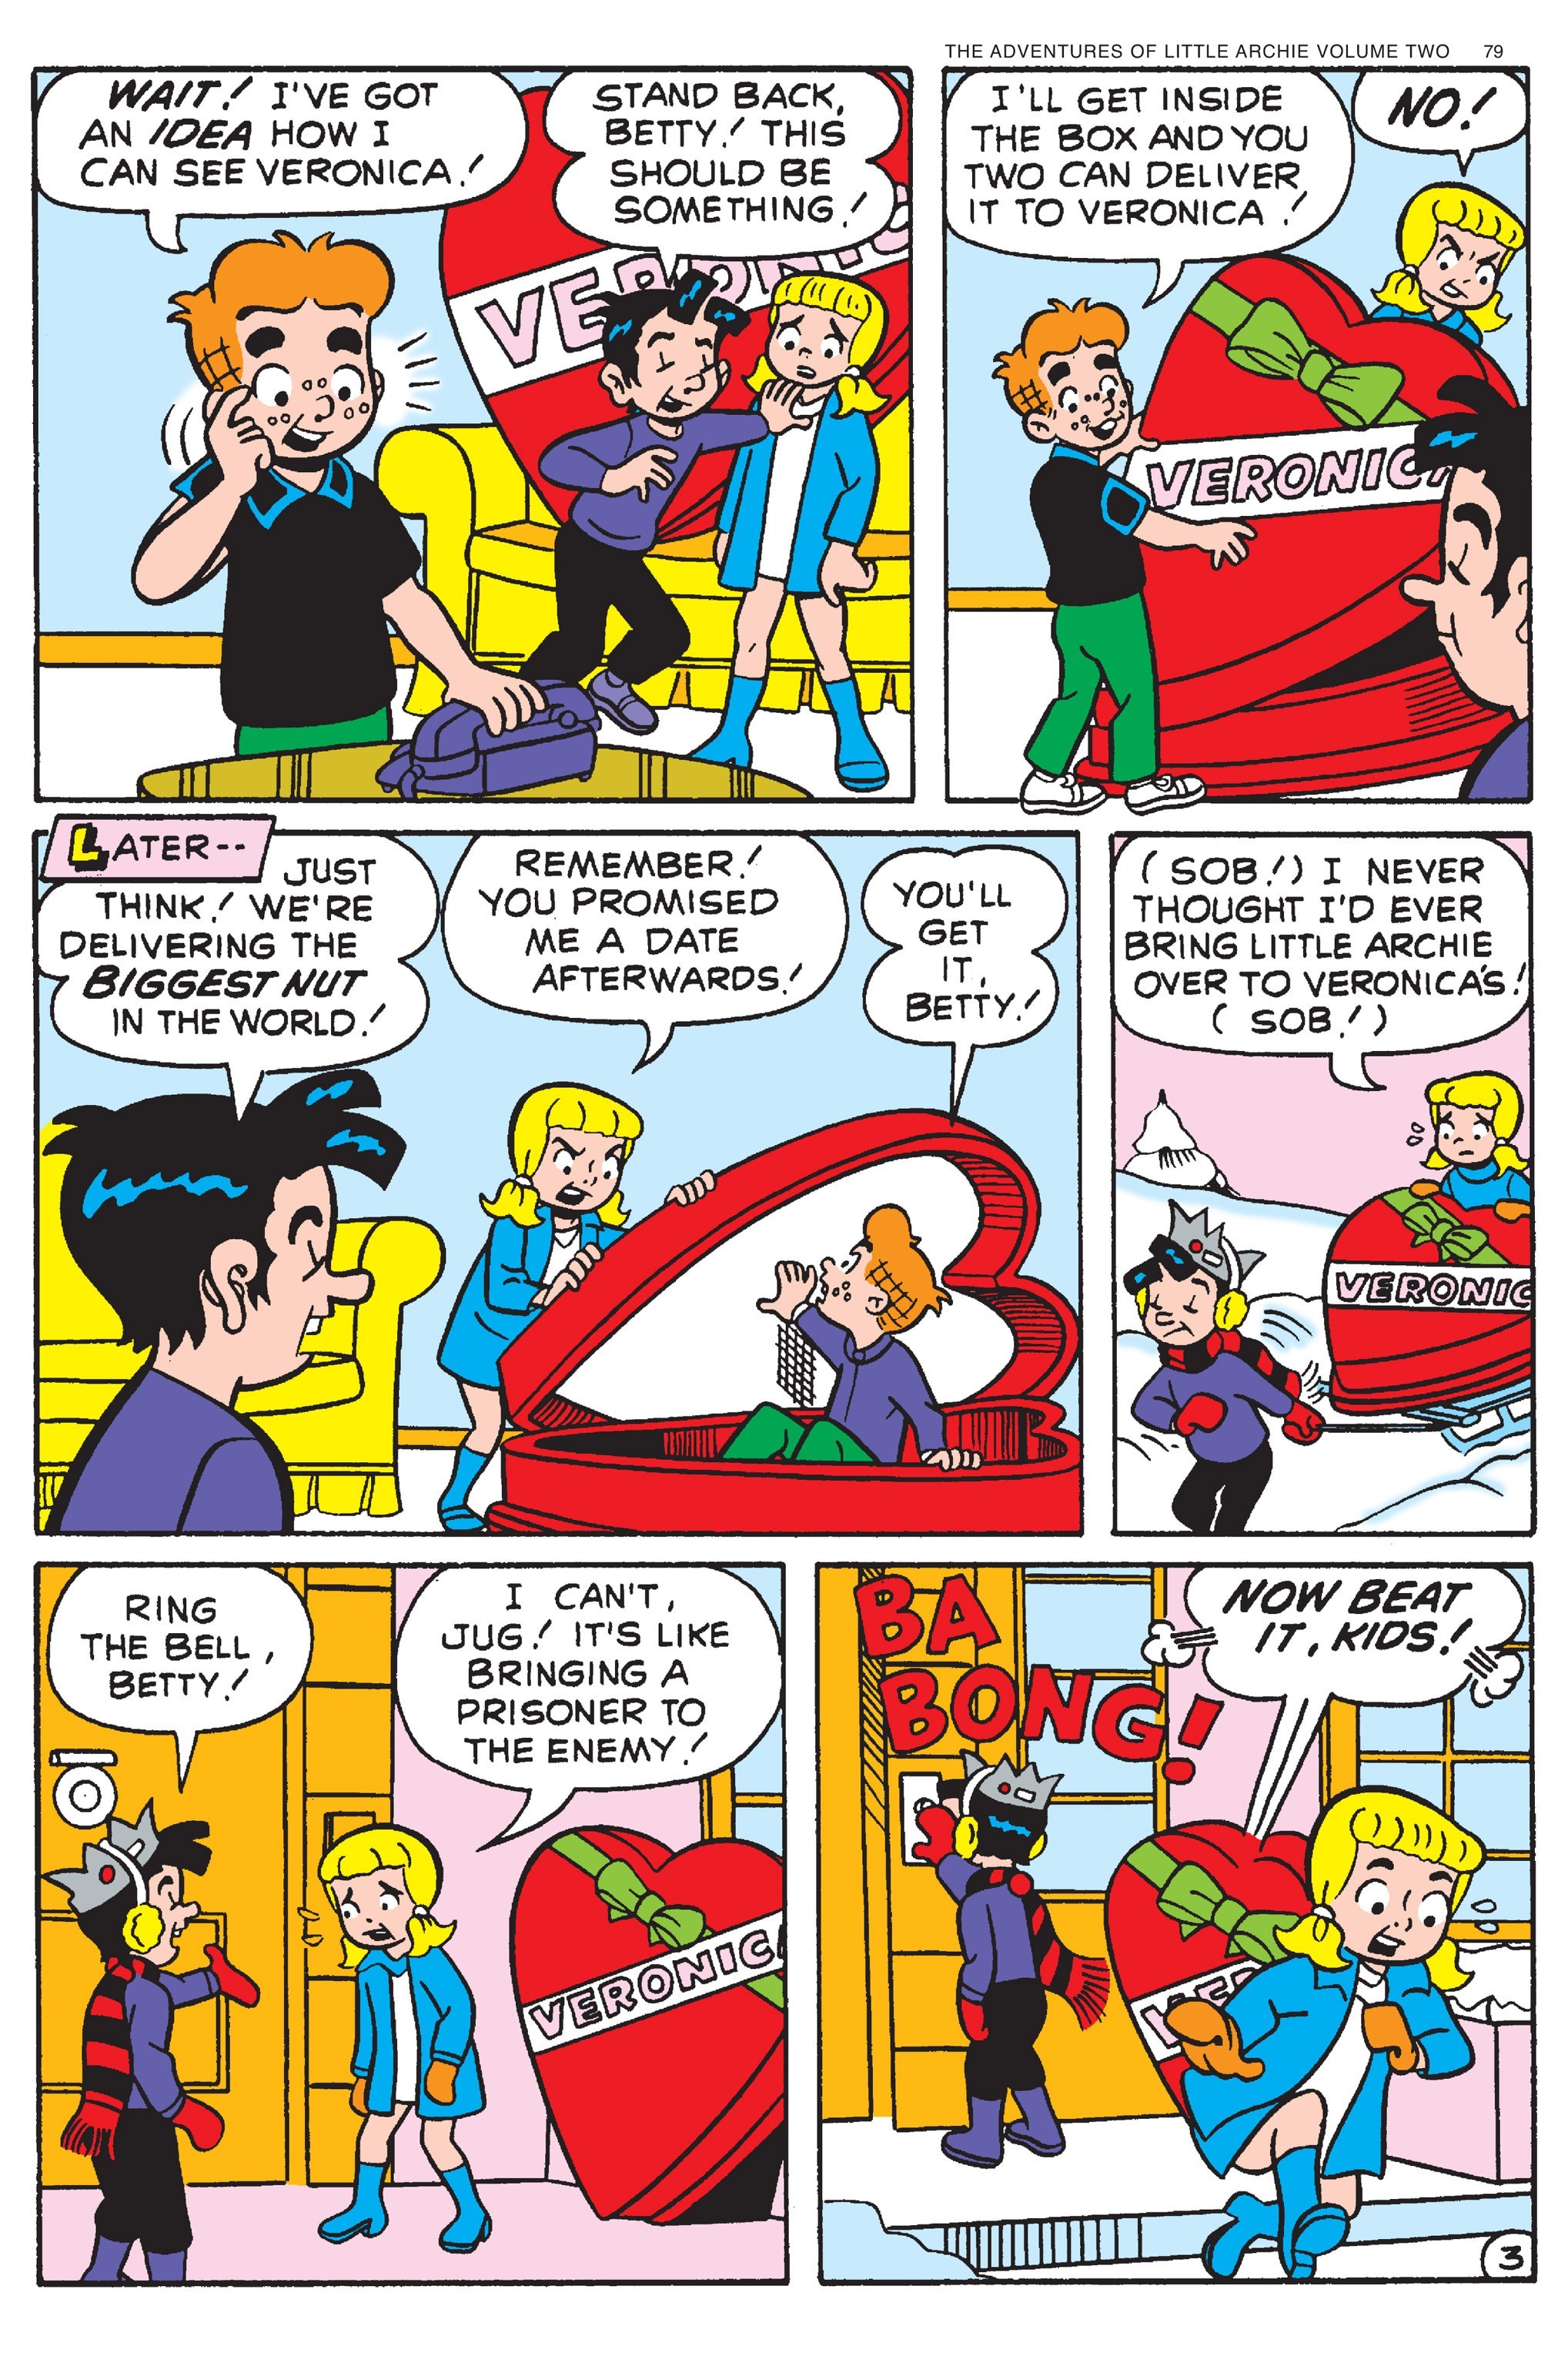 Read online Adventures of Little Archie comic -  Issue # TPB 2 - 80